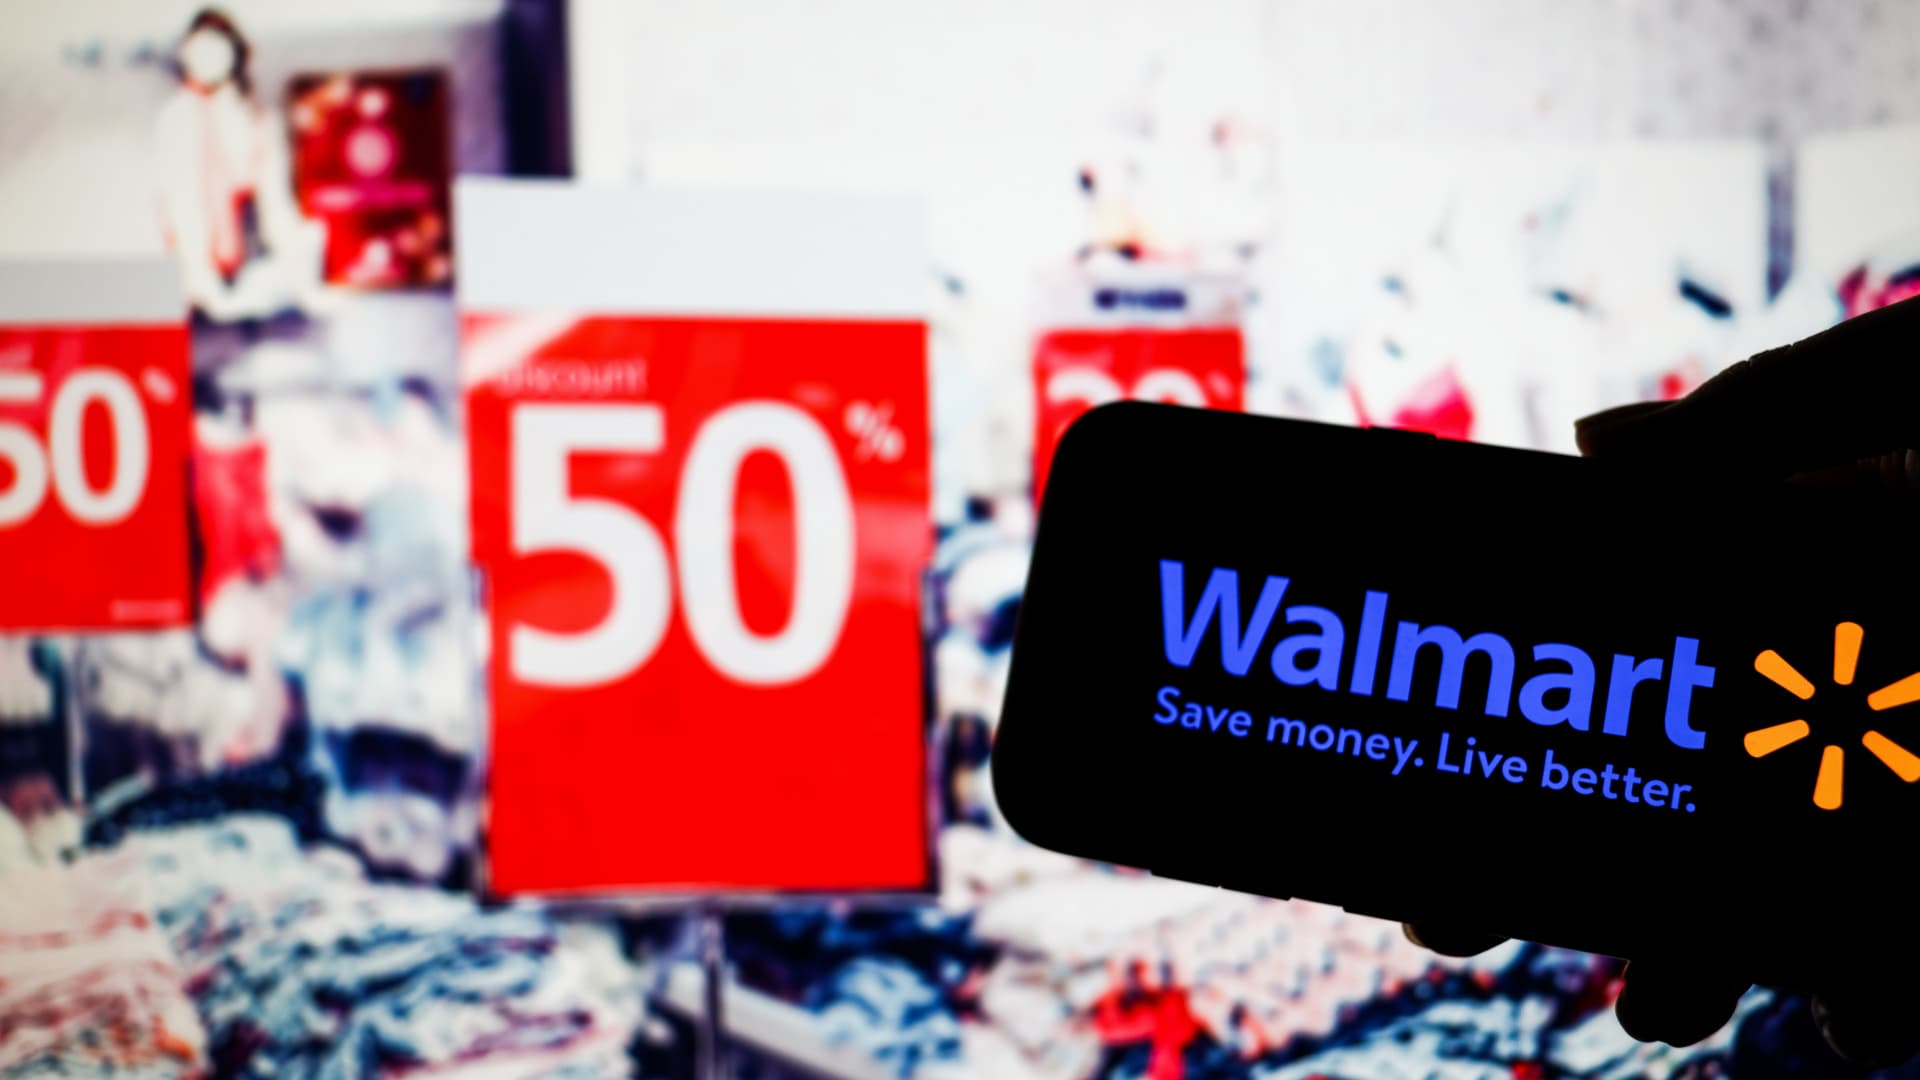 The lesson for Main Street from the Walmart, Target inventory failures